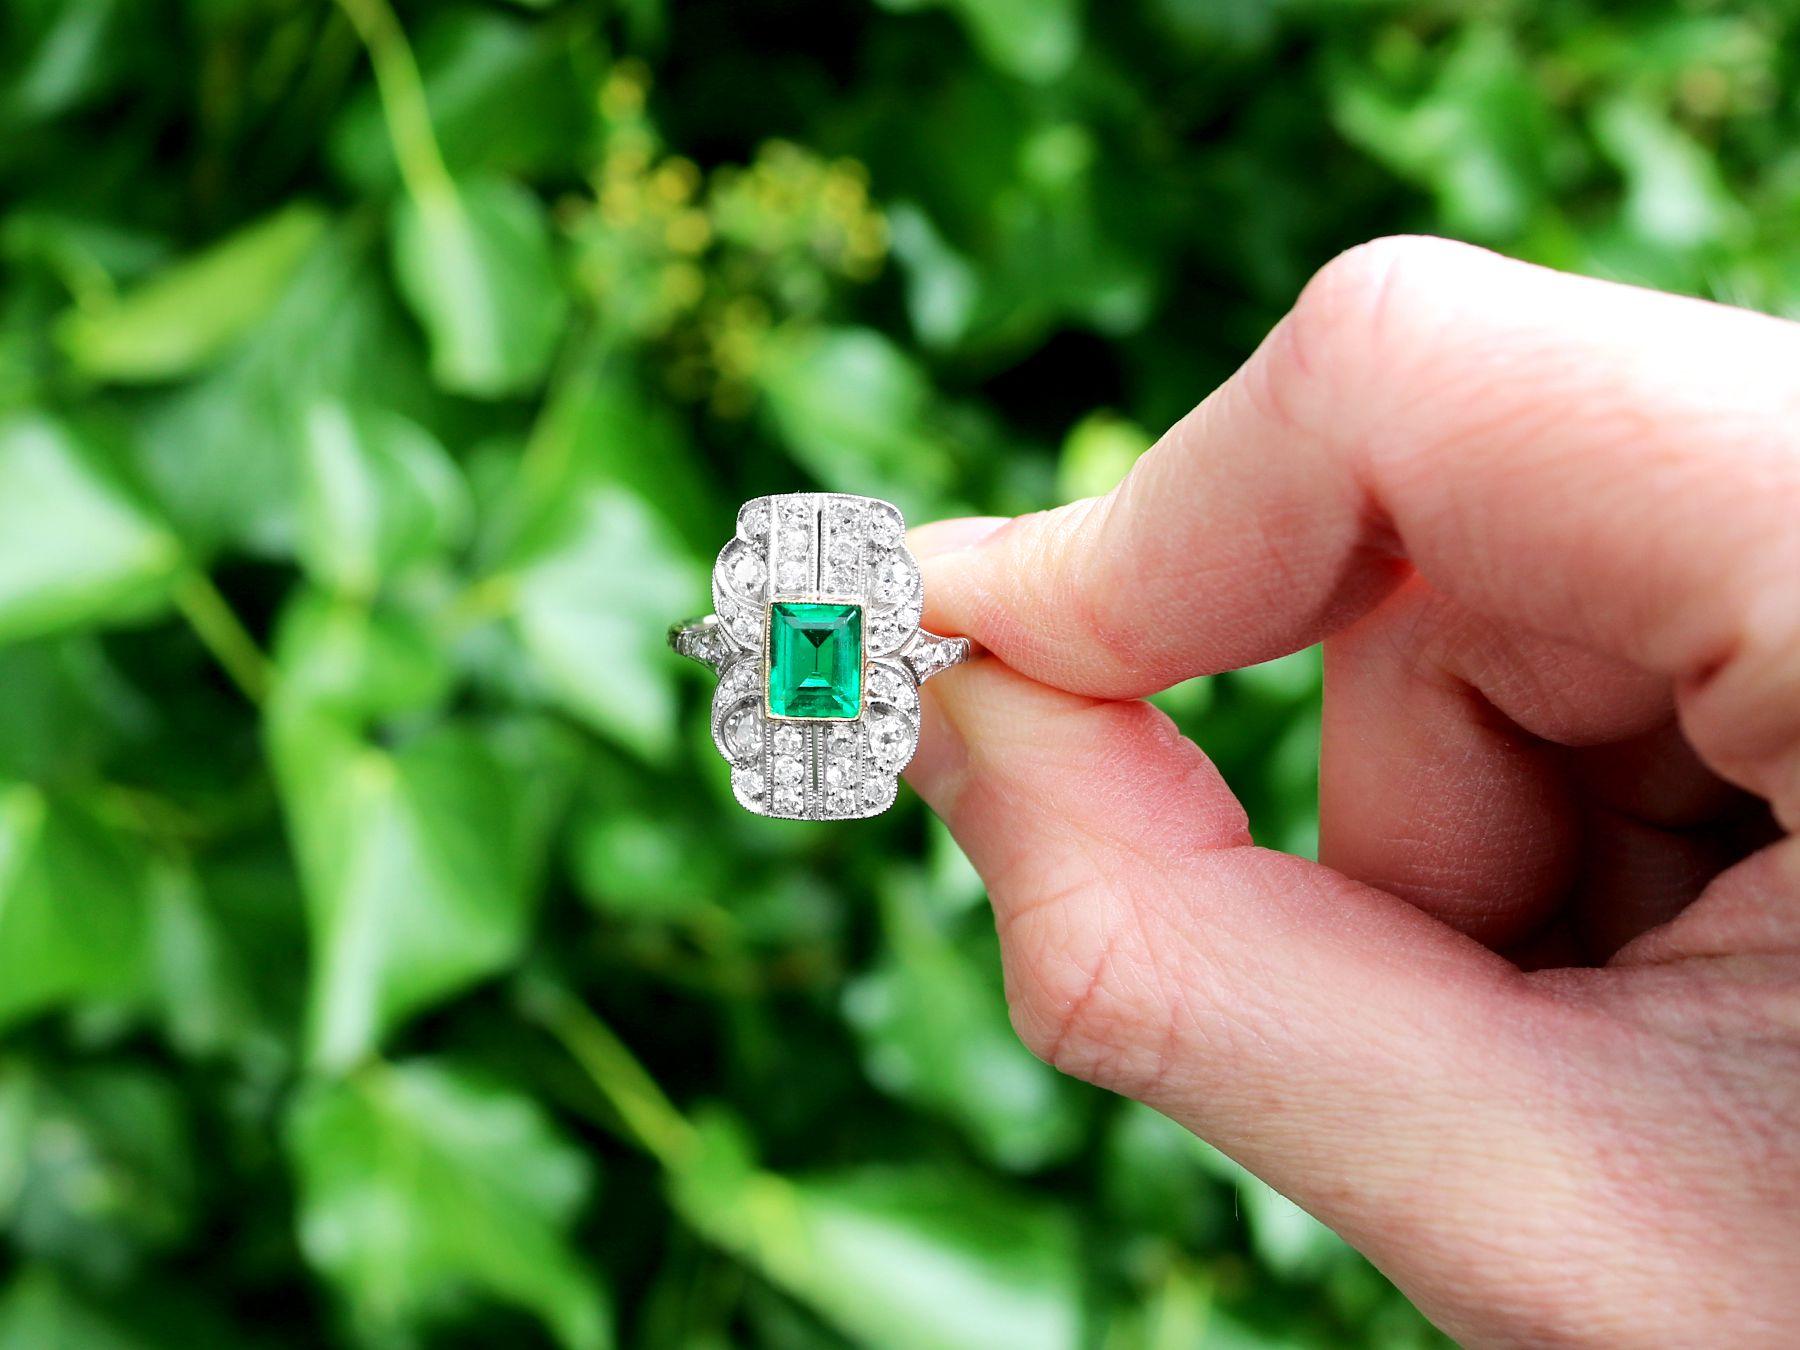 A stunning, fine and impressive 1.13 carat emerald, 1.11 carat diamond, 18 karat yellow gold and platinum dress ring; part of our diverse gemstone jewelry and estate jewelry collections

This stunning, fine and impressive emerald ring with diamonds